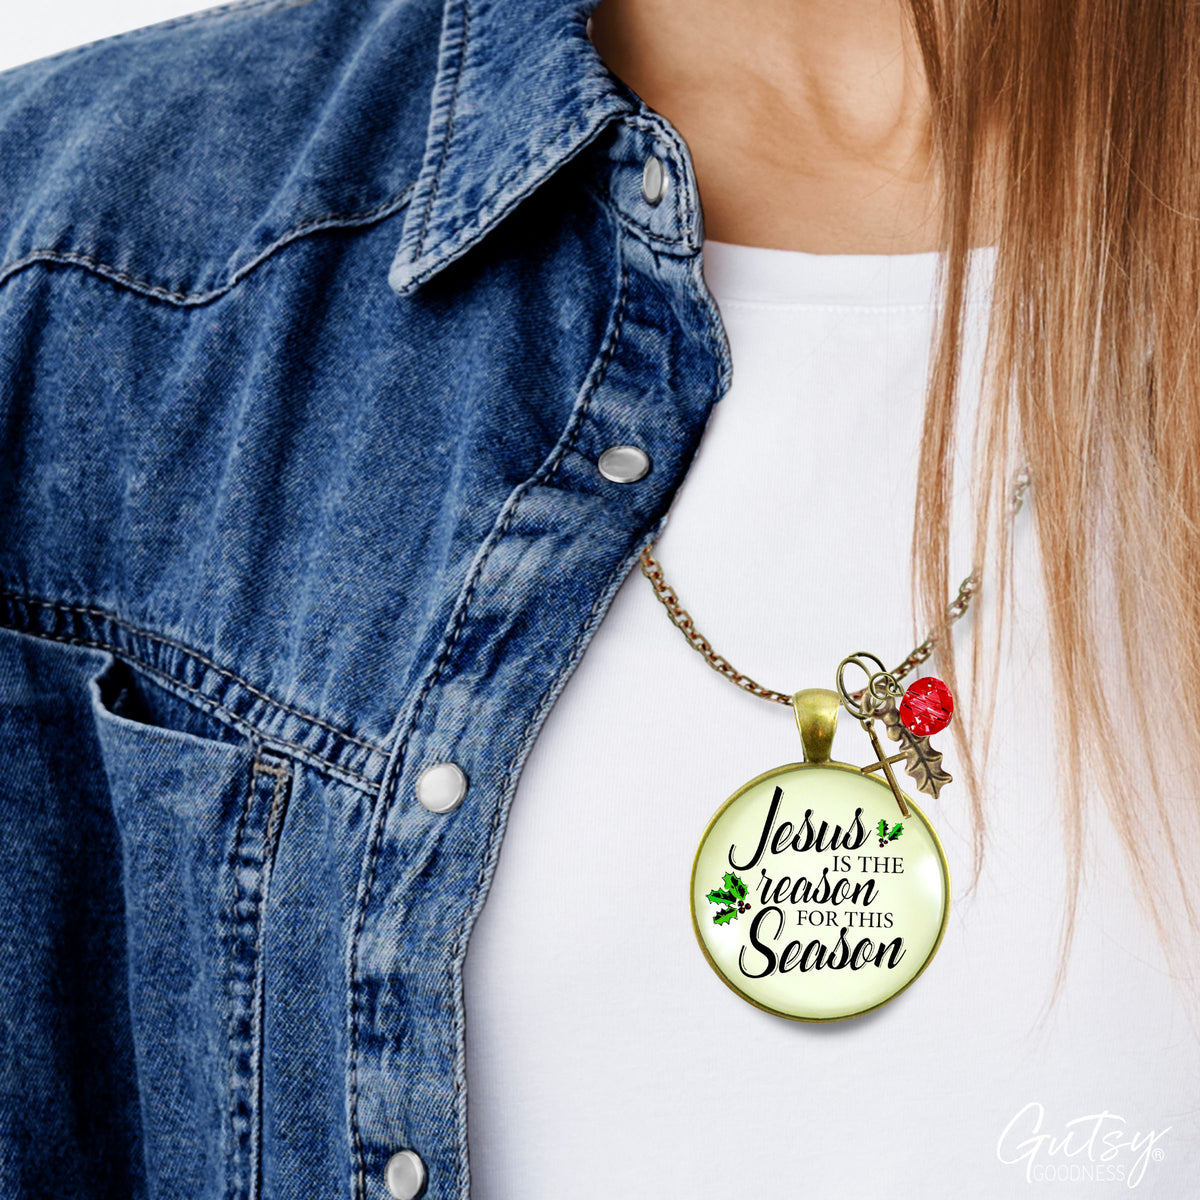 Jesus Is The Reason Necklace Merry Christmas Handmade Faith Jewelry Gift For Women Cross Holly Charms  Necklace - Gutsy Goodness Handmade Jewelry